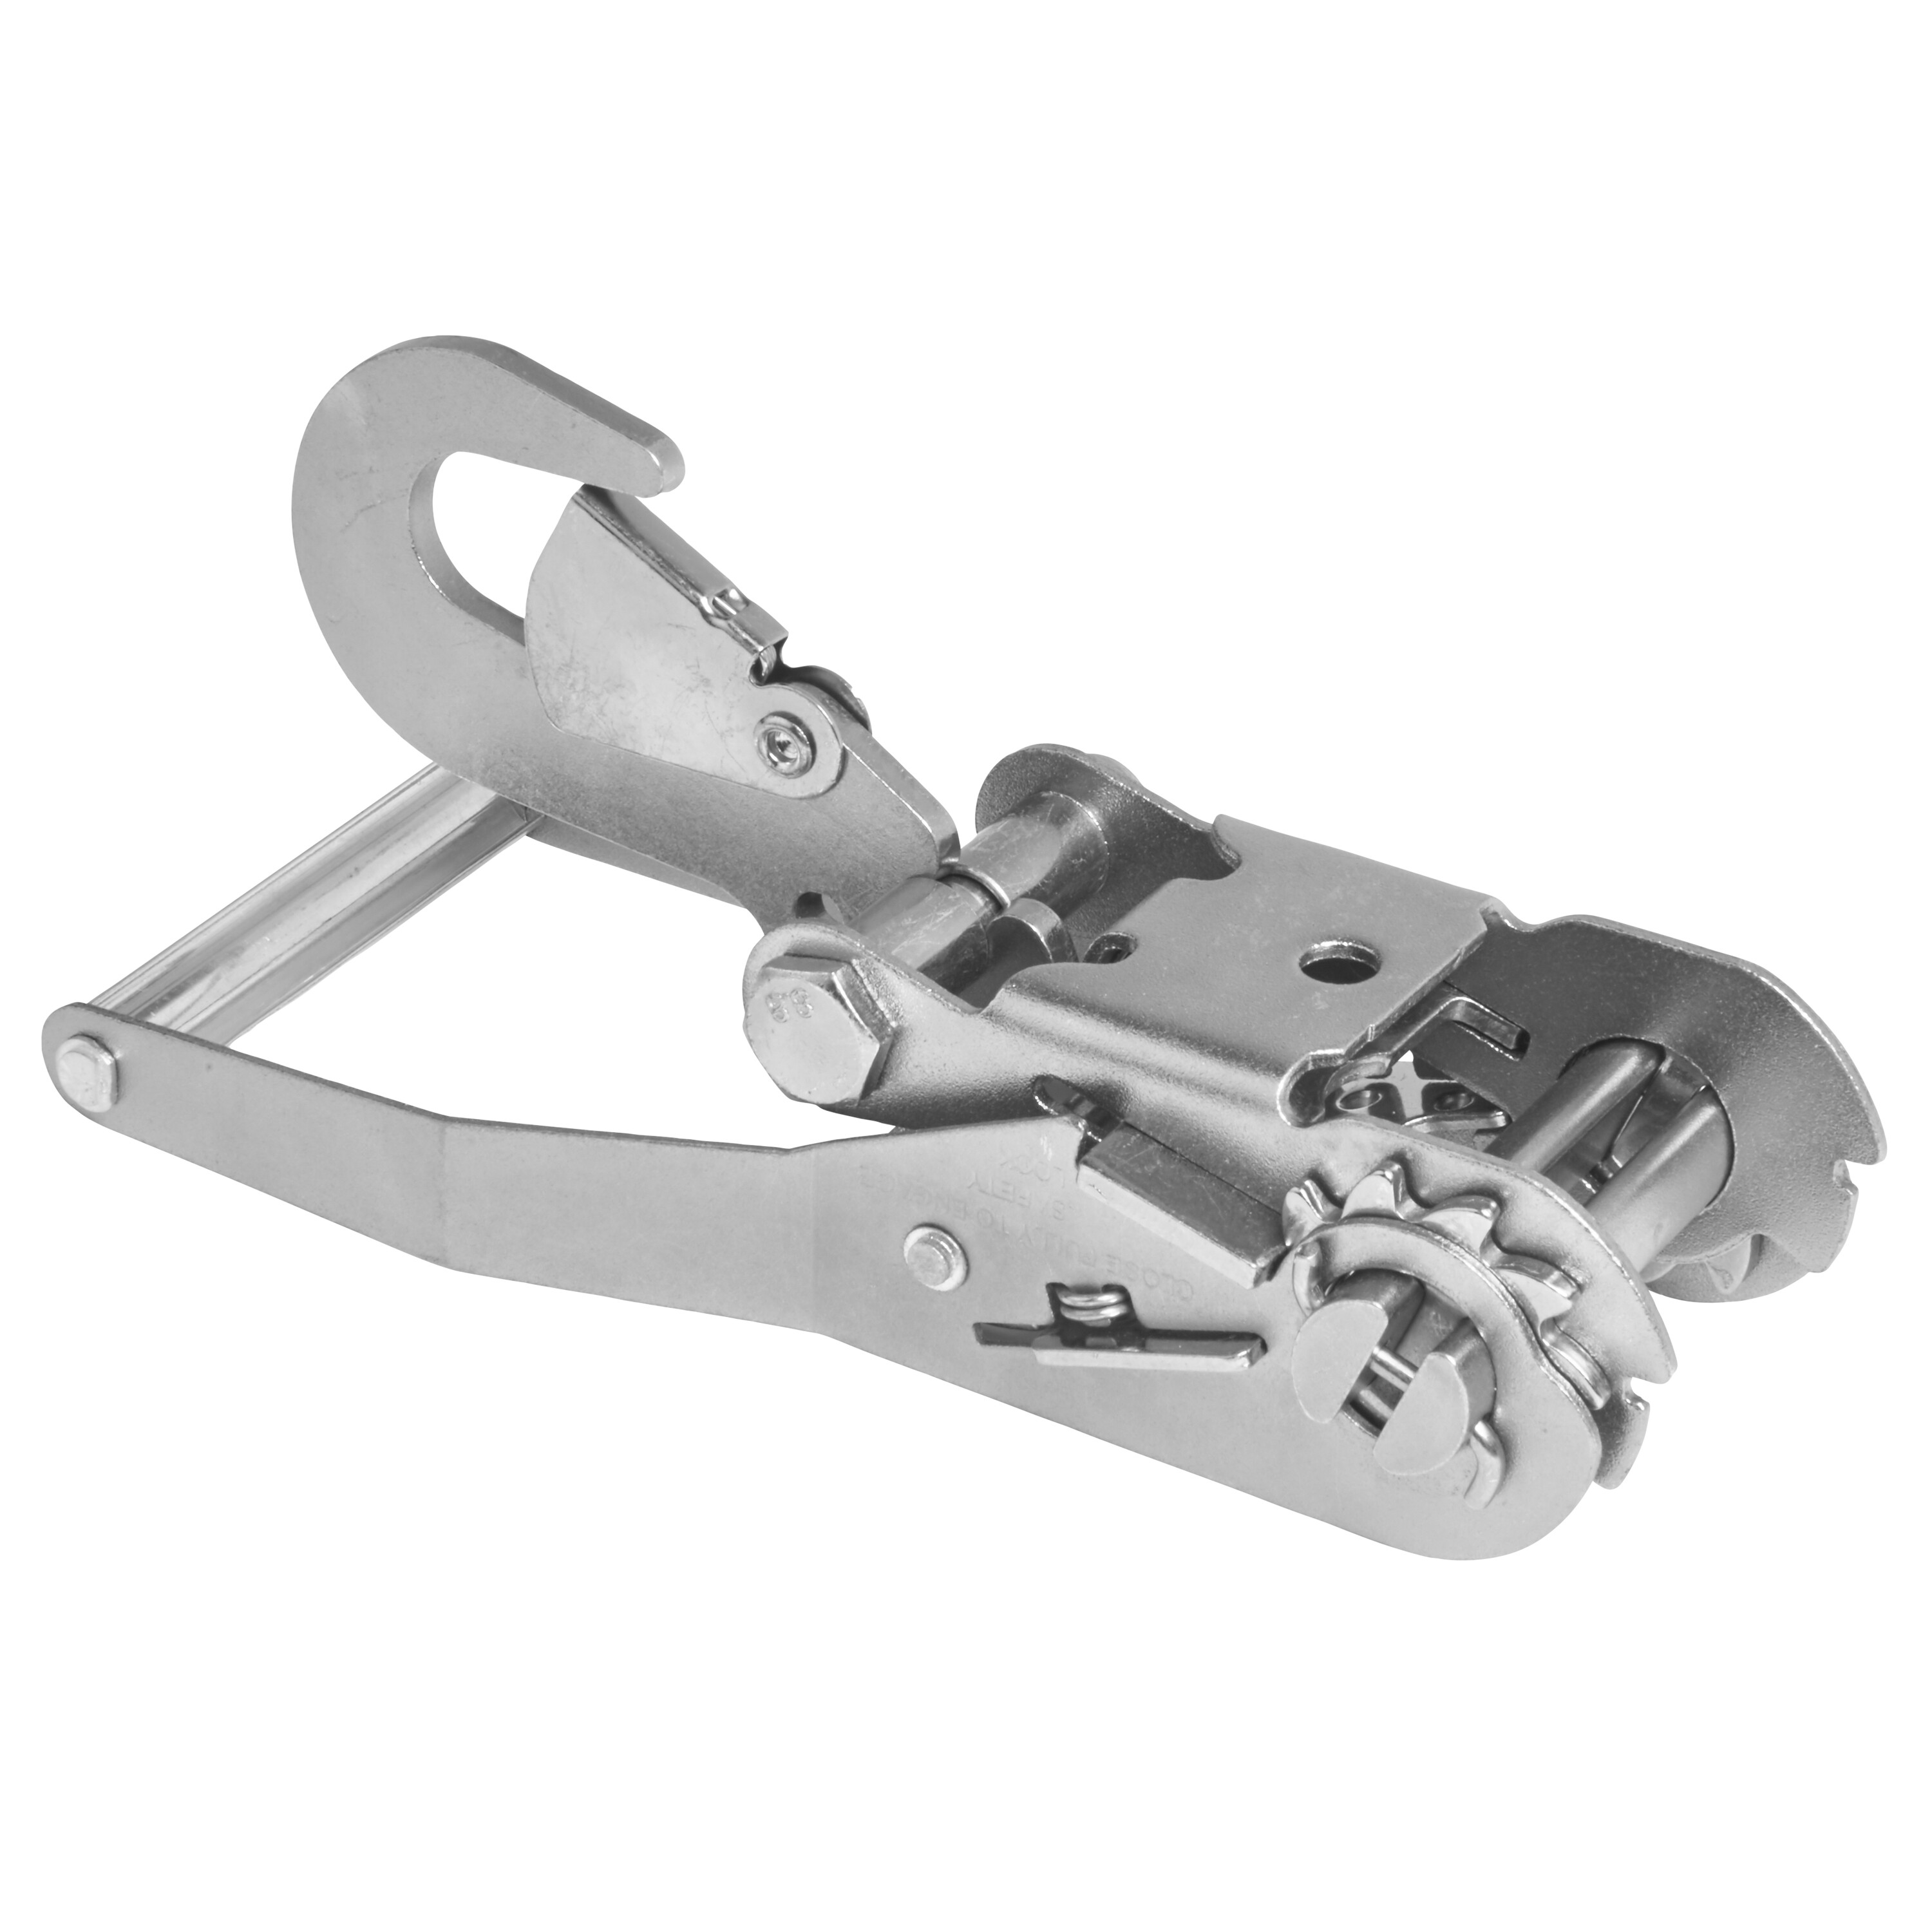 Single Auto Ratchet with Snap Hook